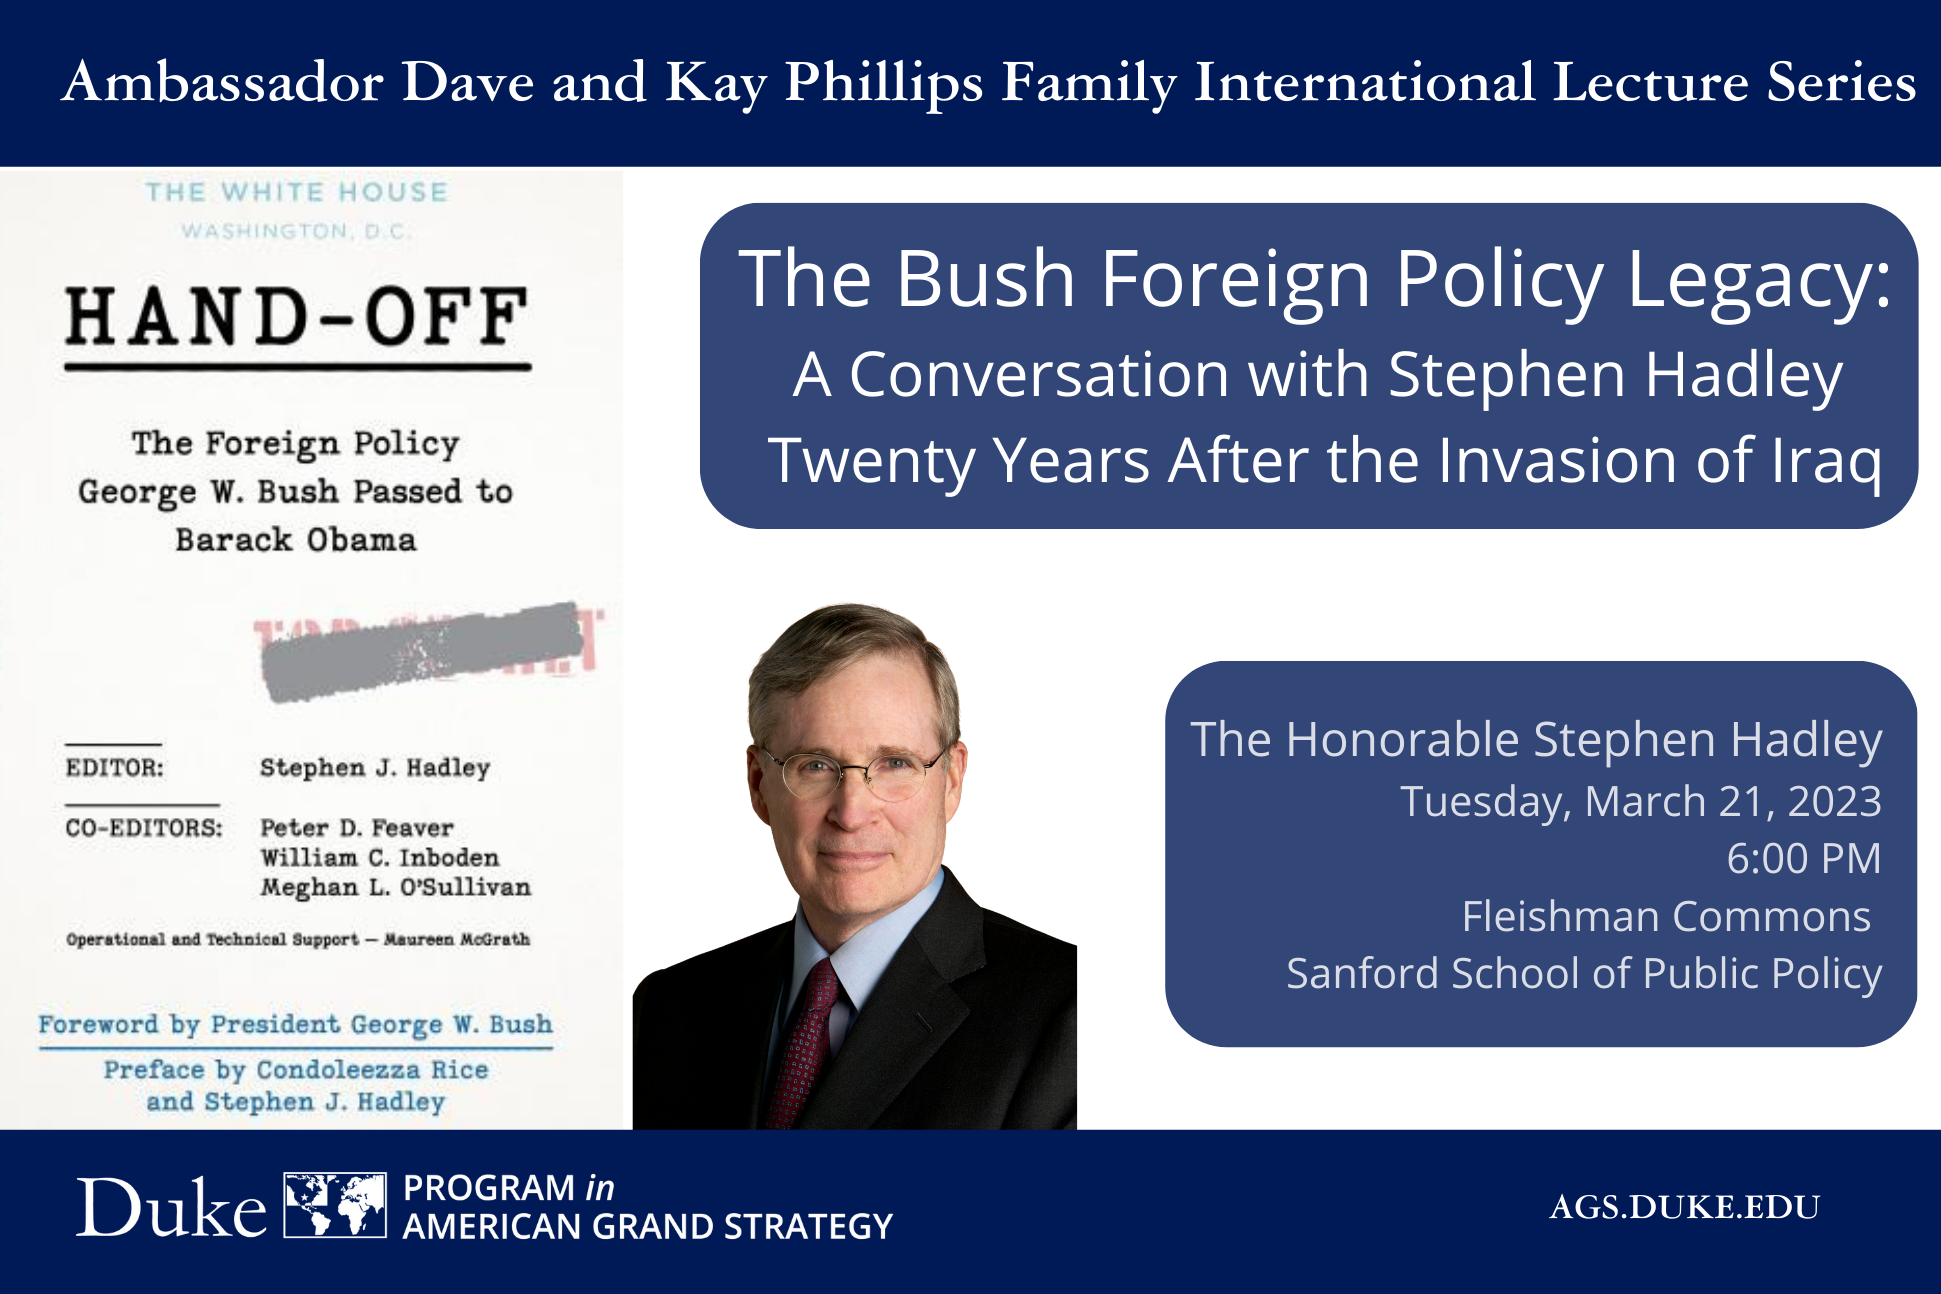 The Bush Foreign Policy Legacy